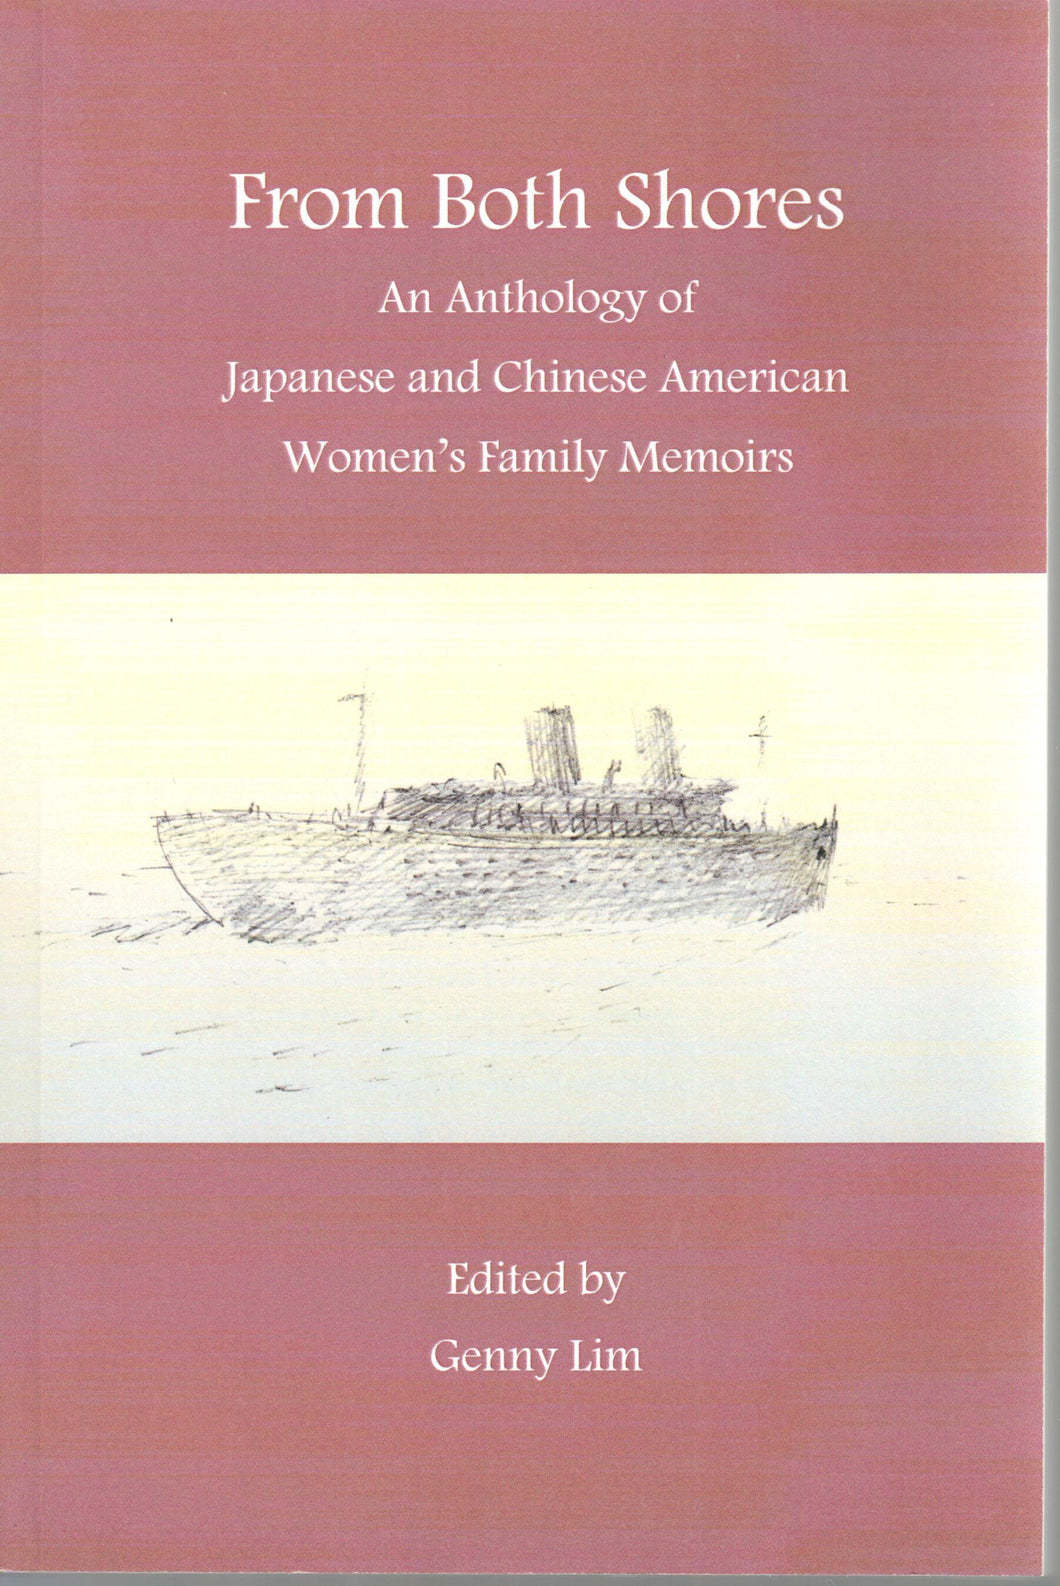 From Both Shores - An Anthology of Japanese and Chinese Women's Family Memoirs